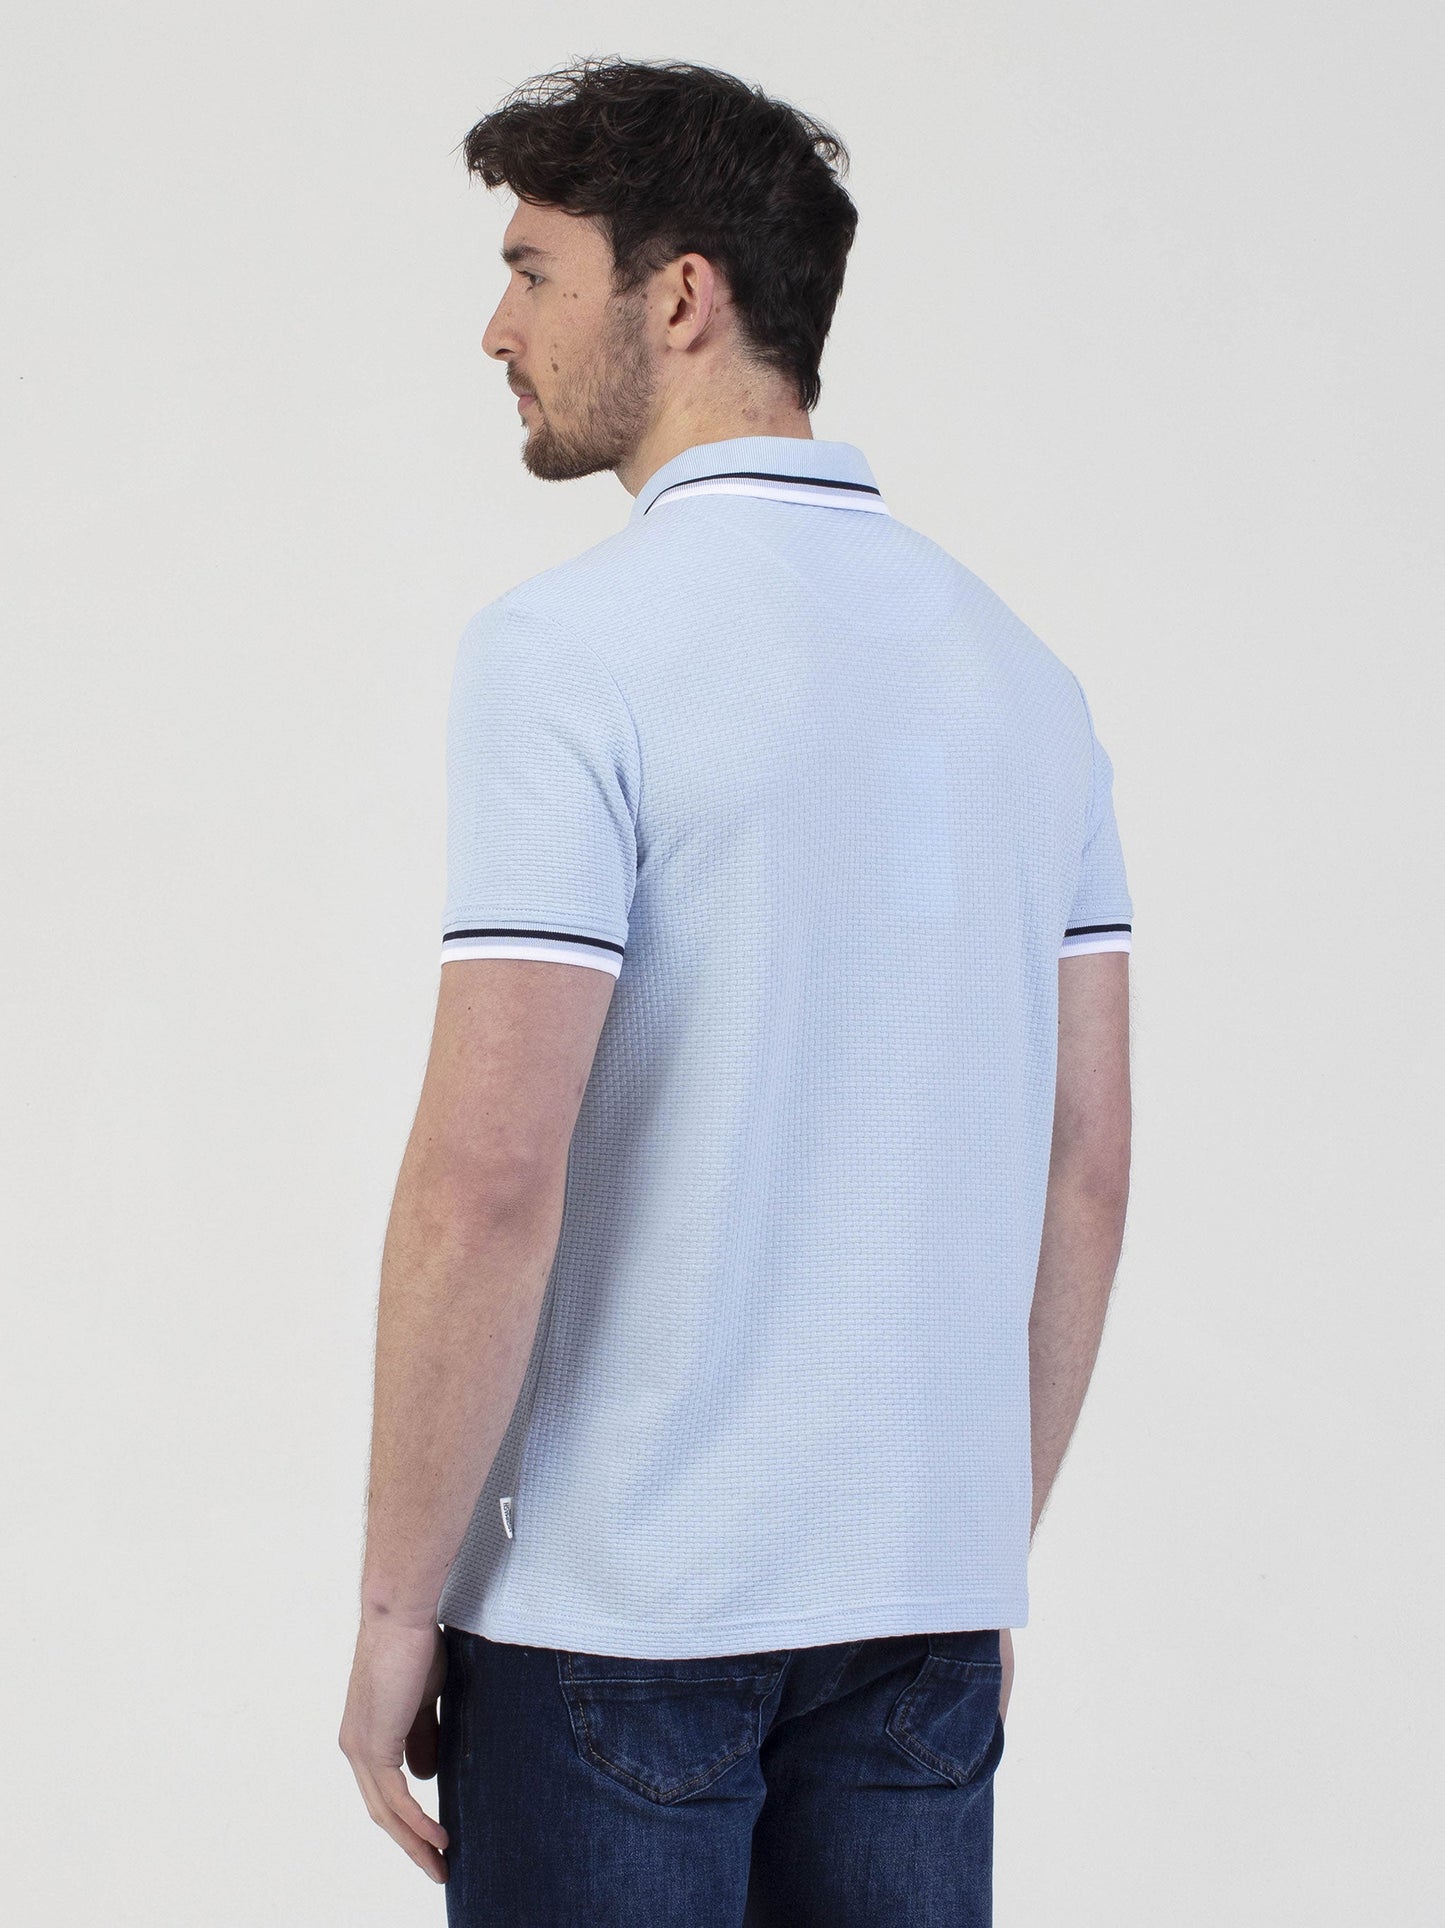 Regular fit mens cotton textured jersey with sport collar tipping sky light blue short sleeve polo mish mash jeans